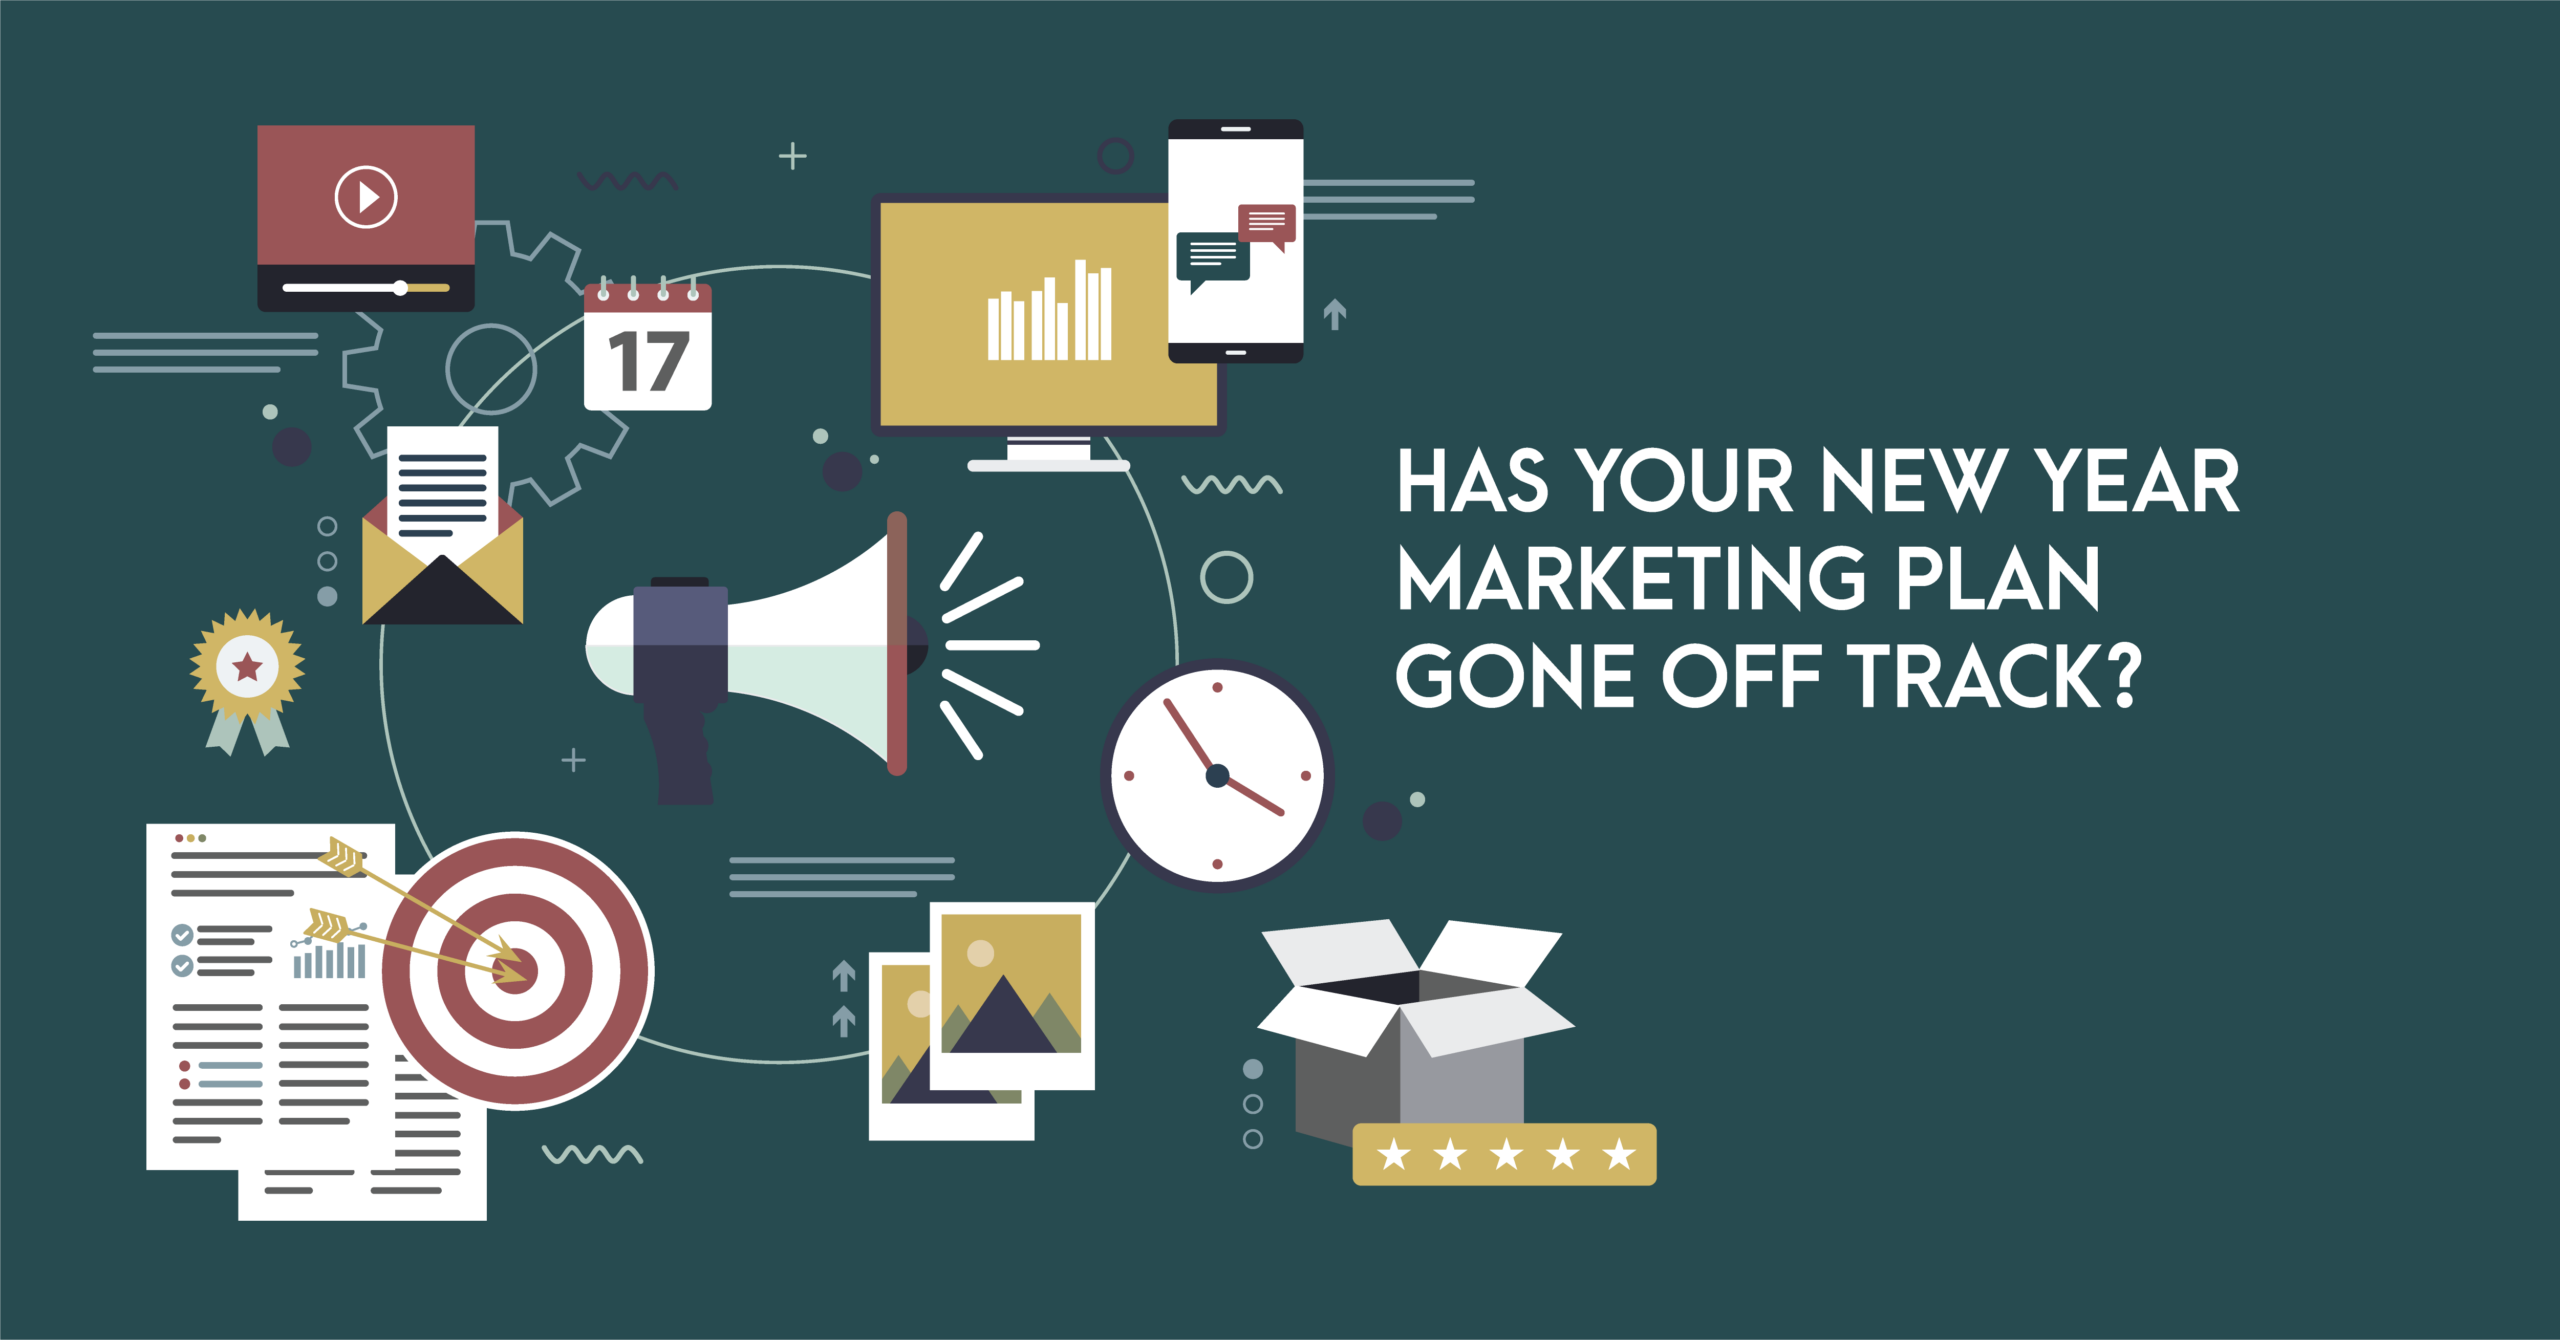 Has your new year marketing plan gone off track 01